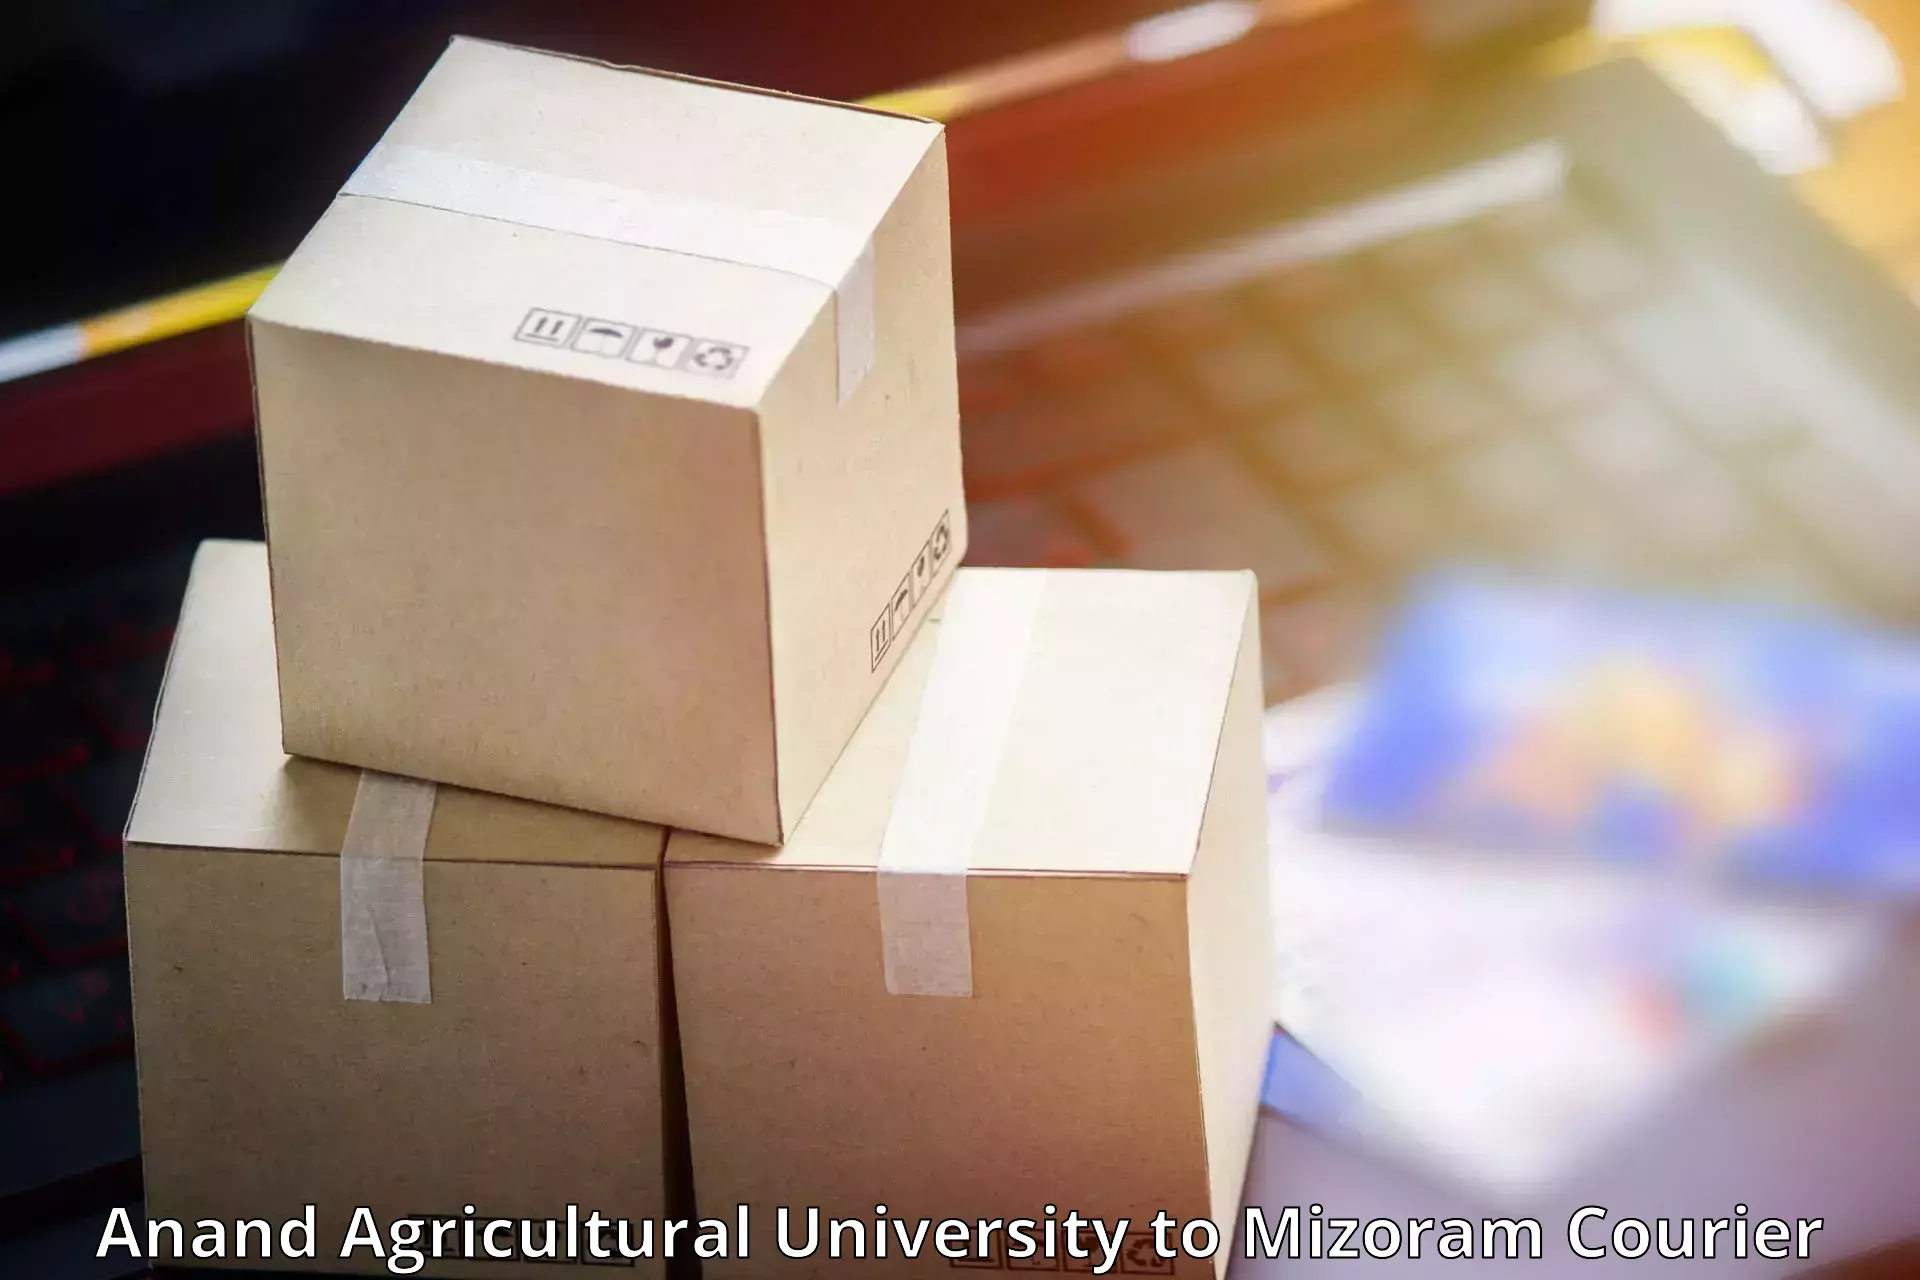 High-speed logistics services Anand Agricultural University to Siaha